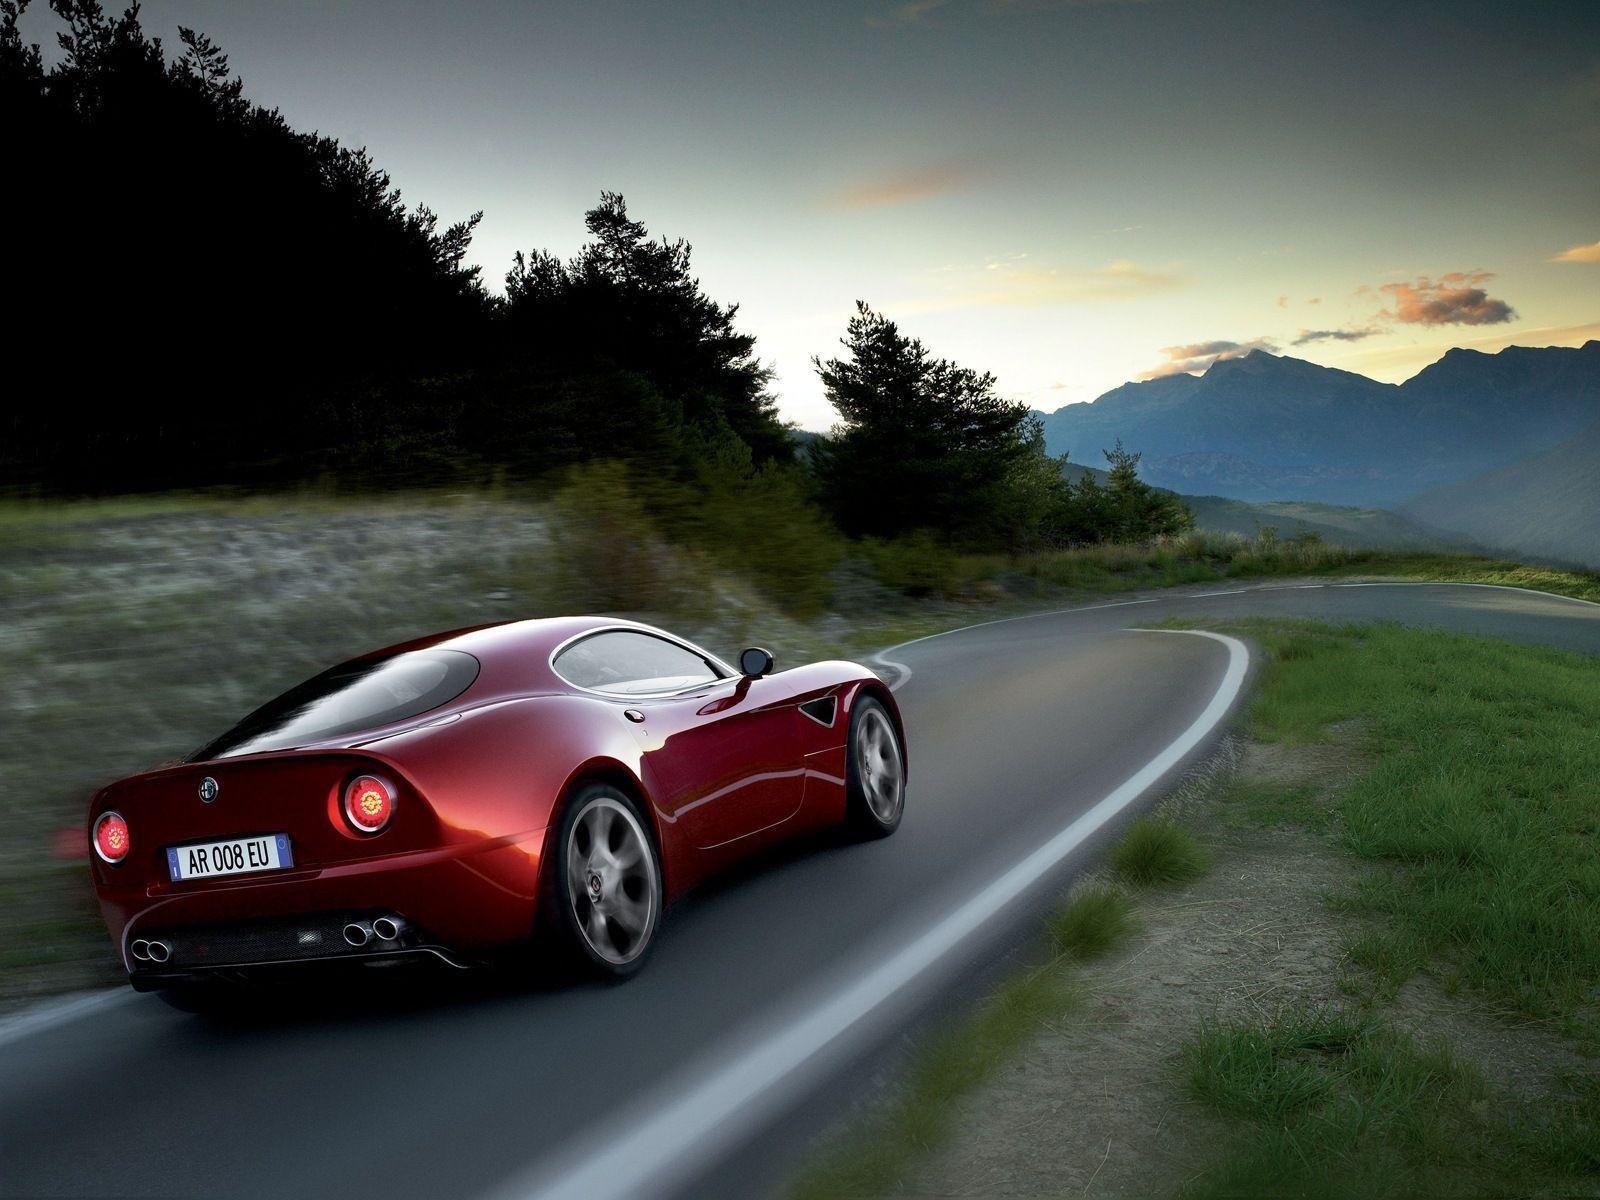 Alfa Romeo Pictures, Wallpapers, Photos & Quality Image